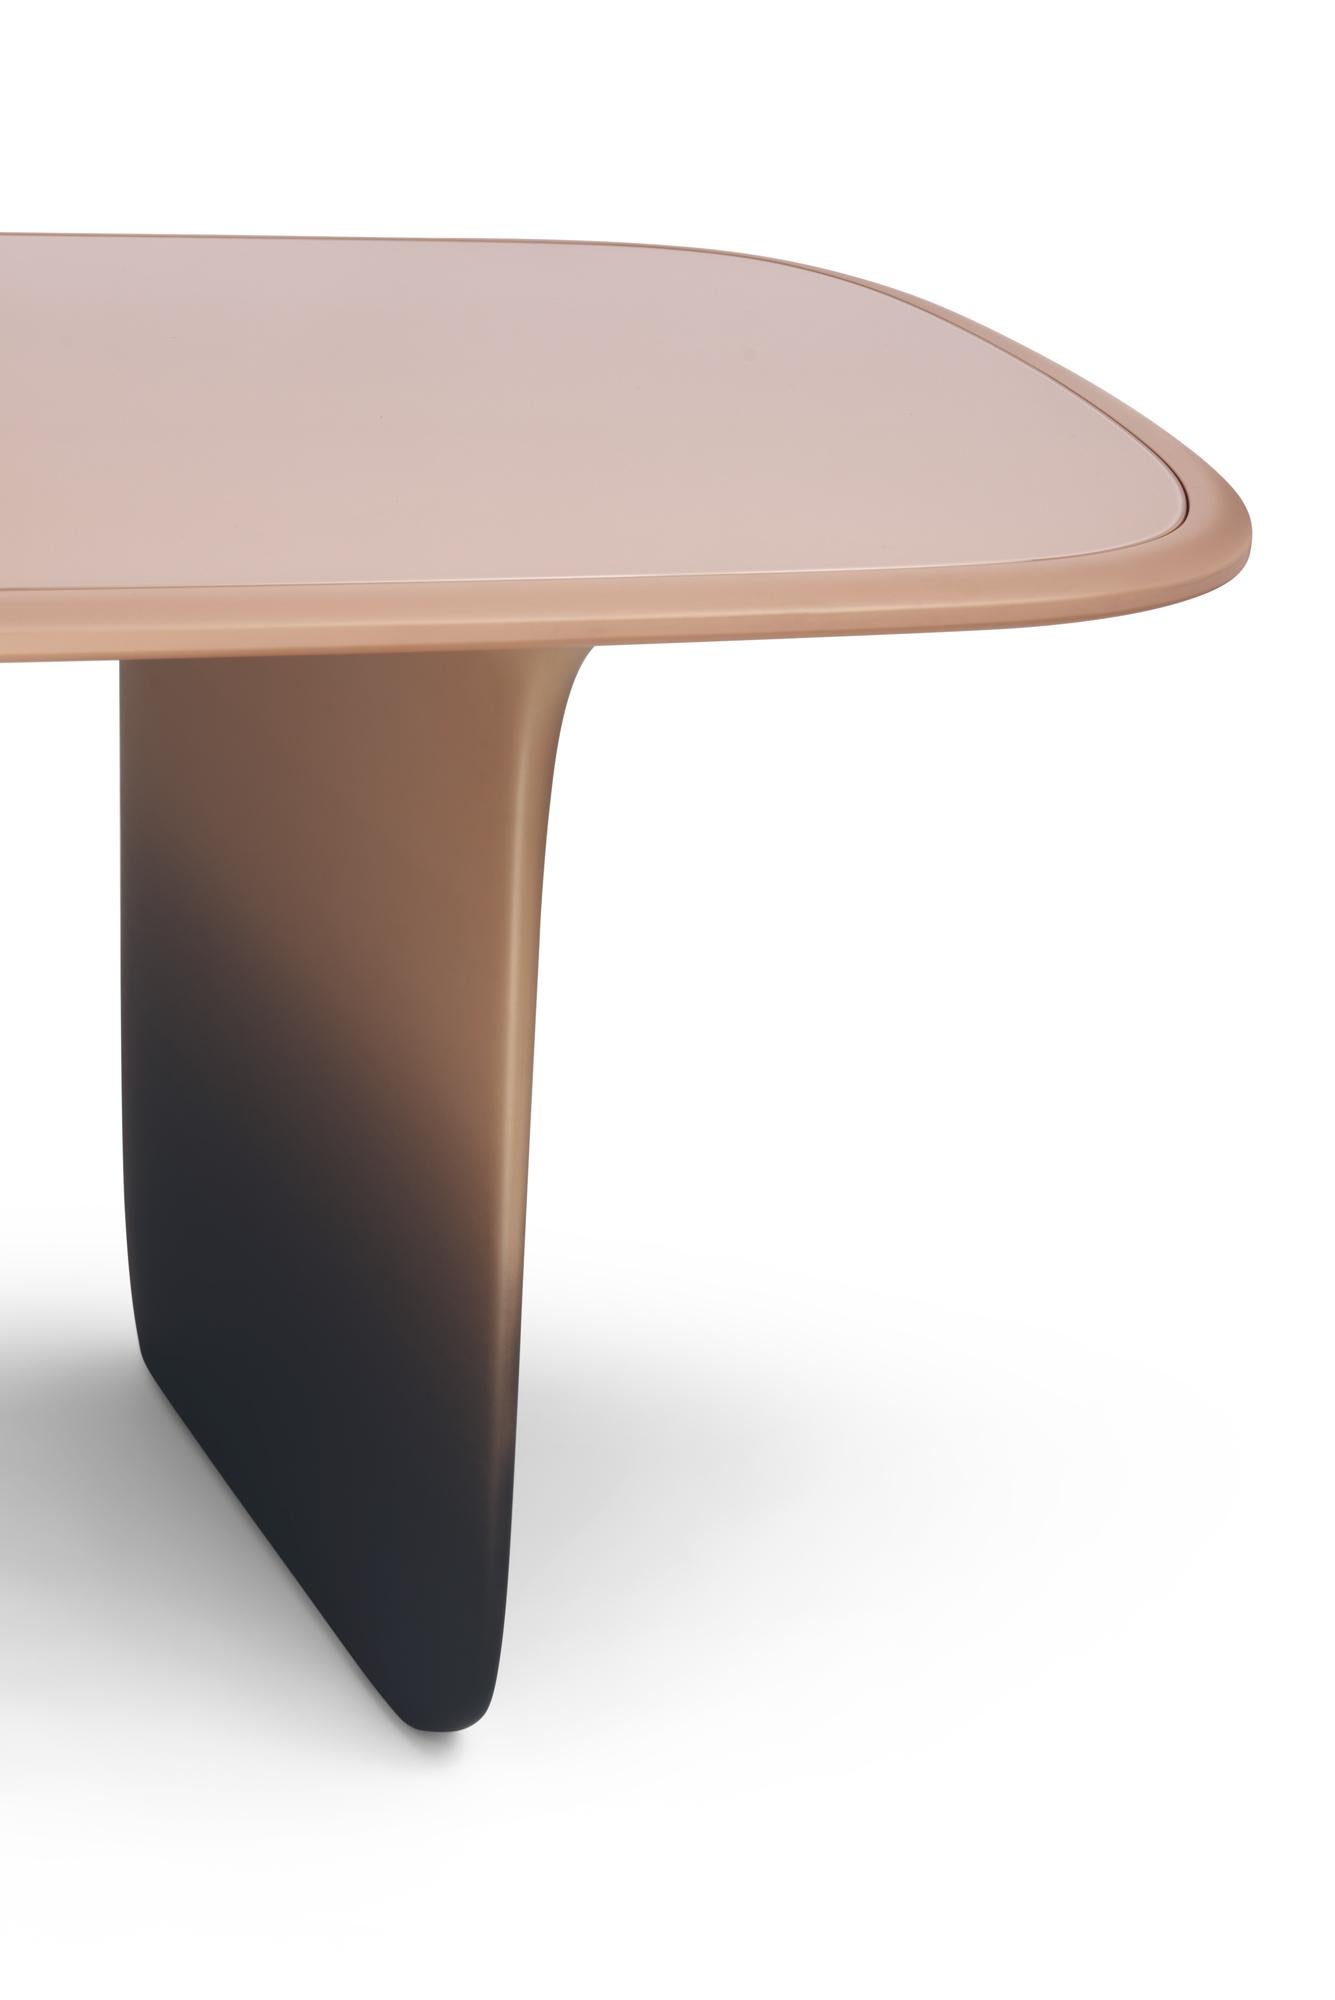 Modern 21st Century Matteo Cibic Table Lacquered MDF Extraclear Glass Scapin Collezioni For Sale